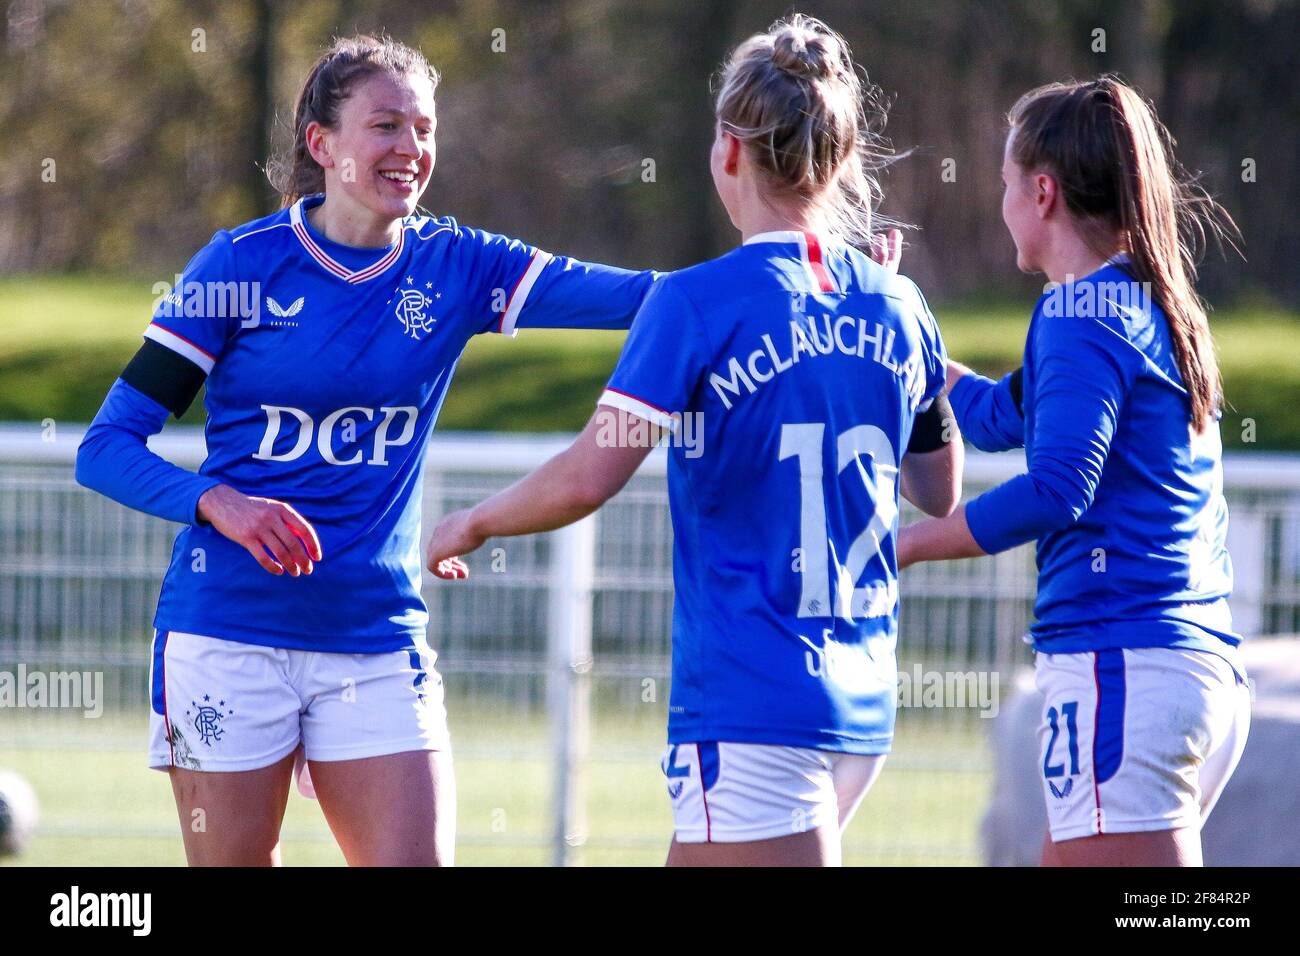 Glasgow, UK. 11th Apr, 2021. GOAL! Lizzie Arnot (#15) of Rangers Women FC celebrates with team mates Rachel McLauchlan (#12) & Kirsty Howart (#21) during the Scottish Building Society SWPL1 Fixture Rangers FC vs Spartans FC at Rangers Training Centre, Glasgow, 11/04/2021 | Images courtesy of www.collargeimages.co.uk Credit: Colin Poultney/Alamy Live News Stock Photo